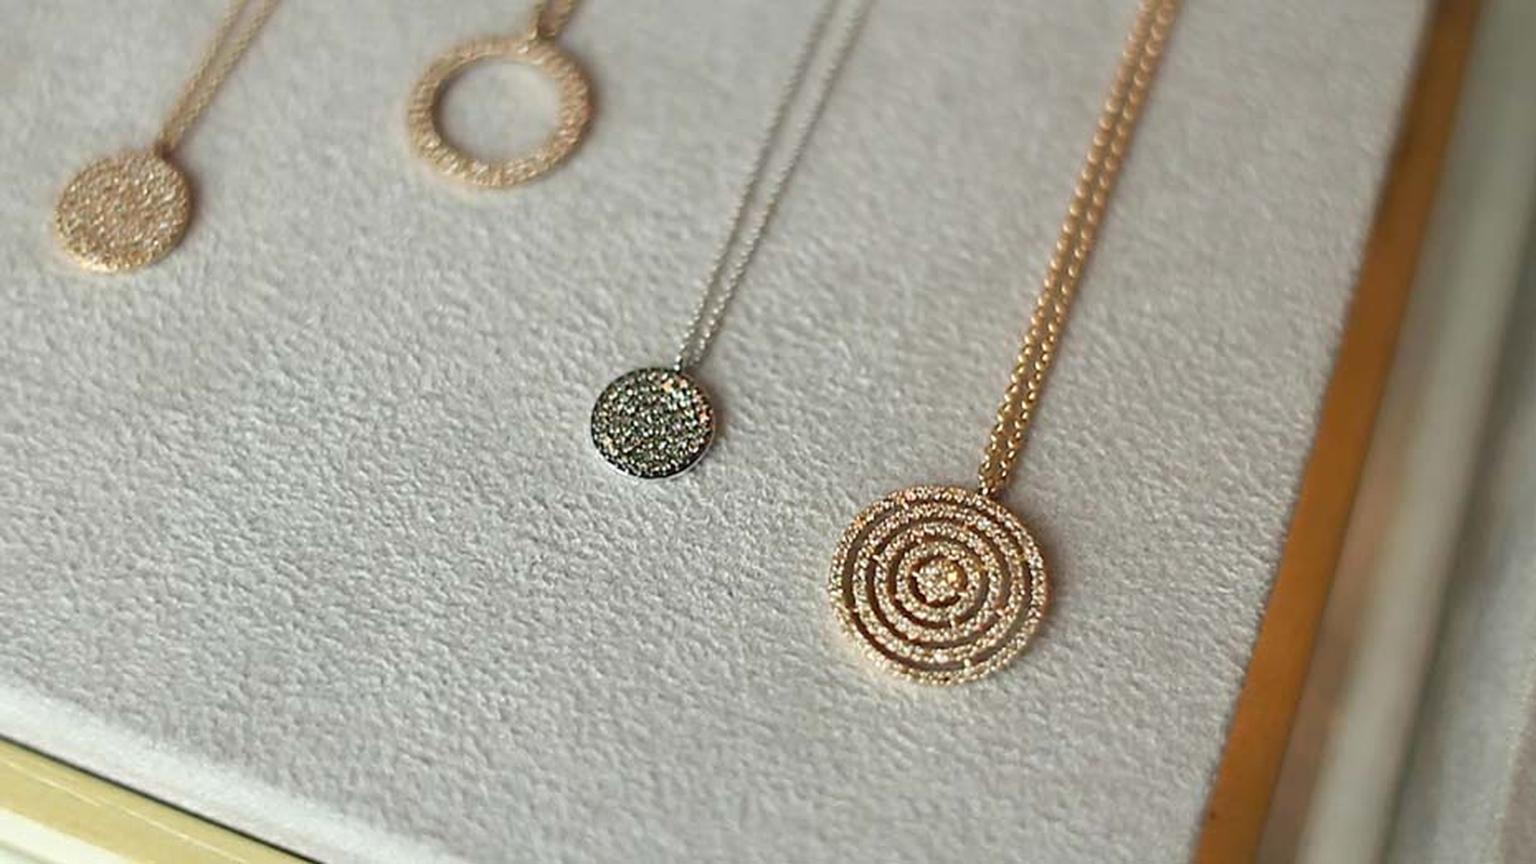 Astley Clarke's Muse collection diamond necklaces are available in rhodium, rose or yellow gold.